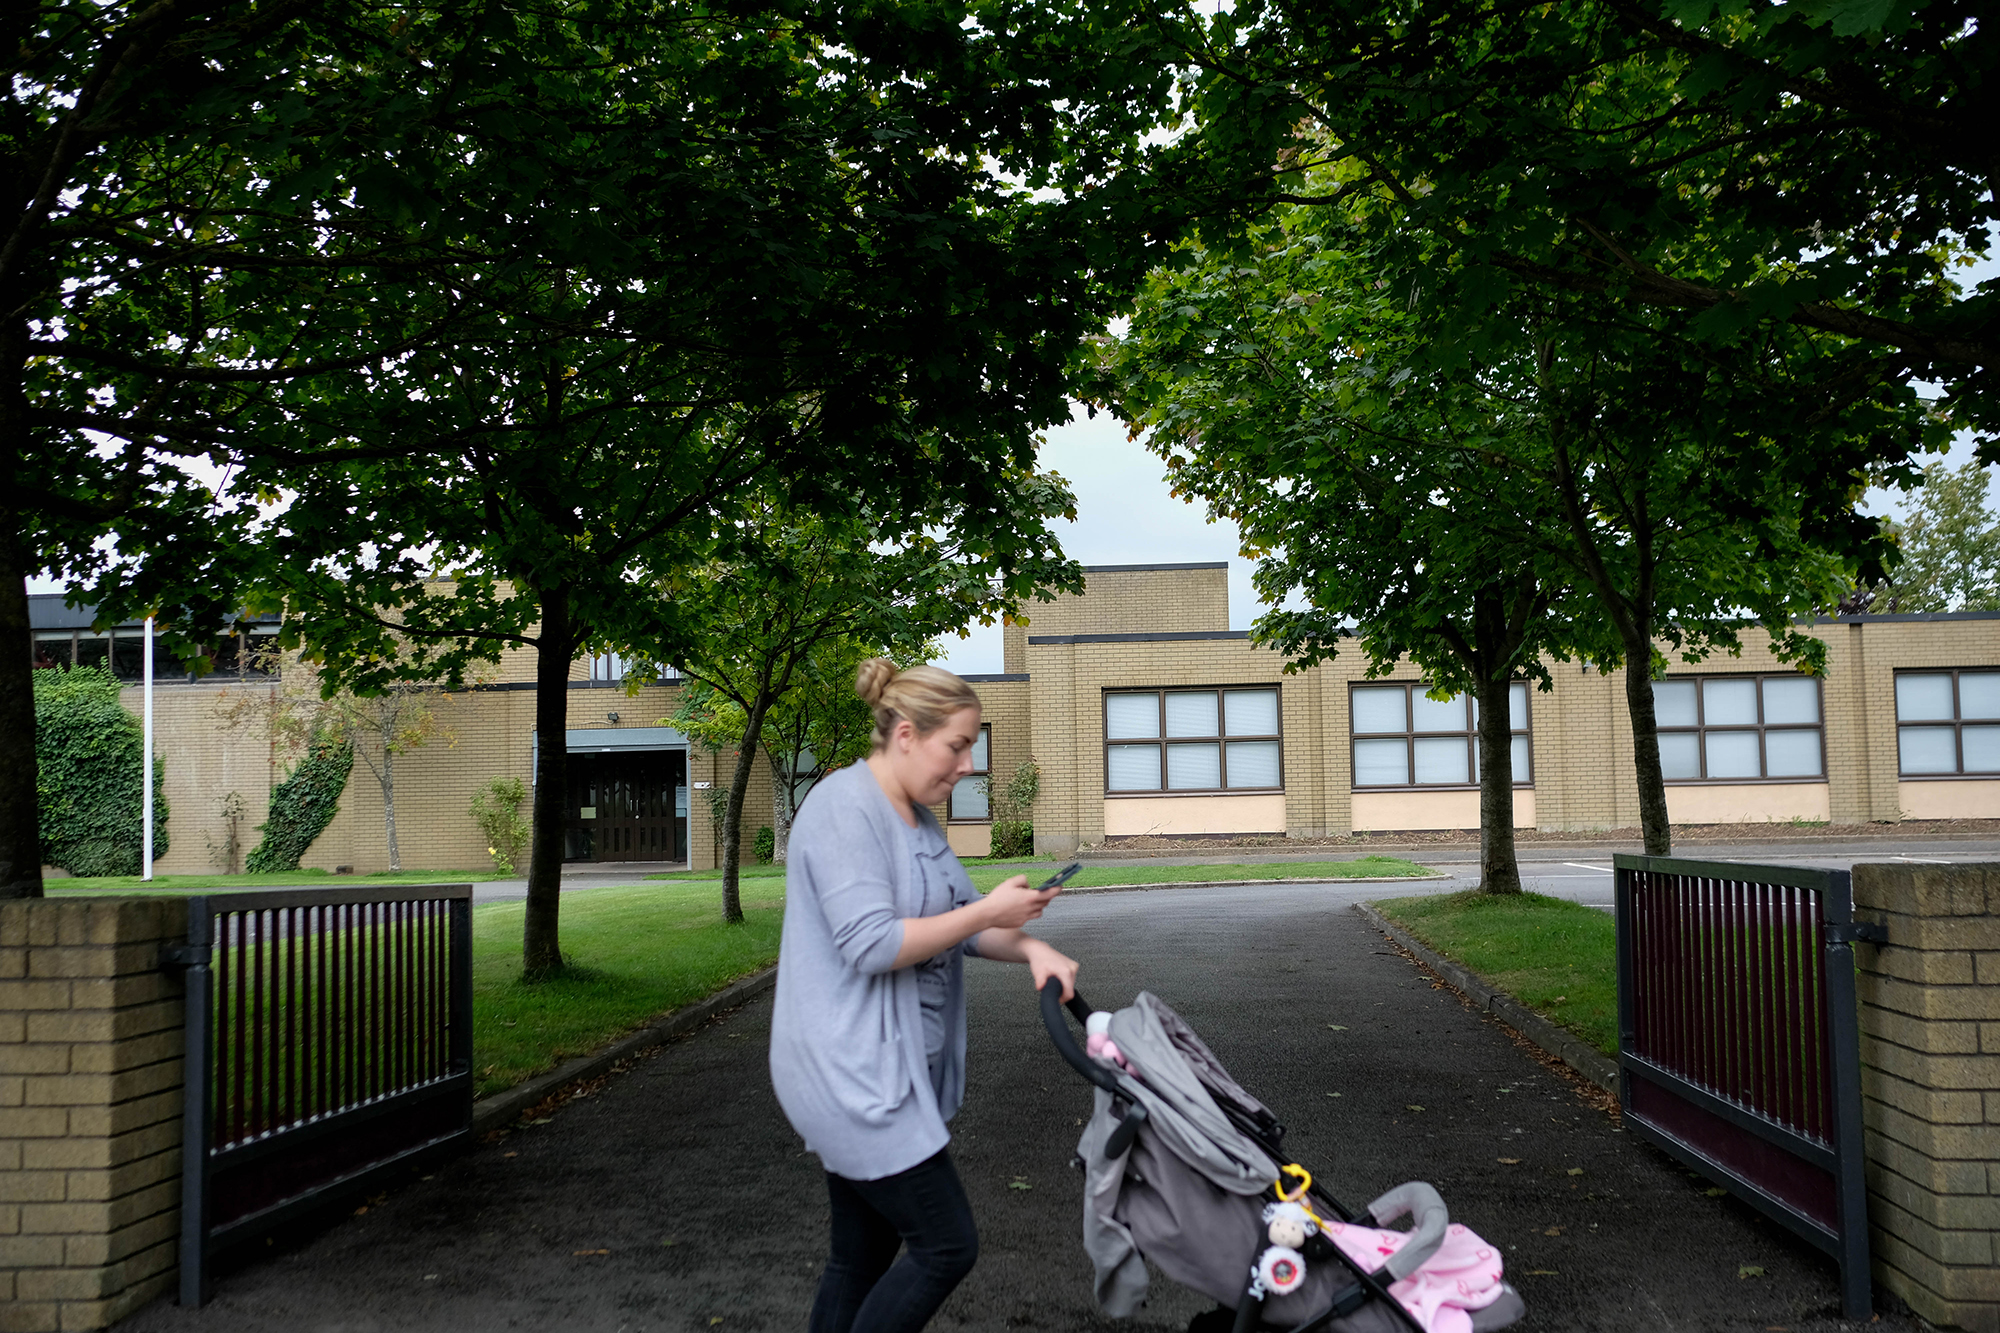 A woman passes one of the three Catholic primary schools on the green avenue of Leixlip.
